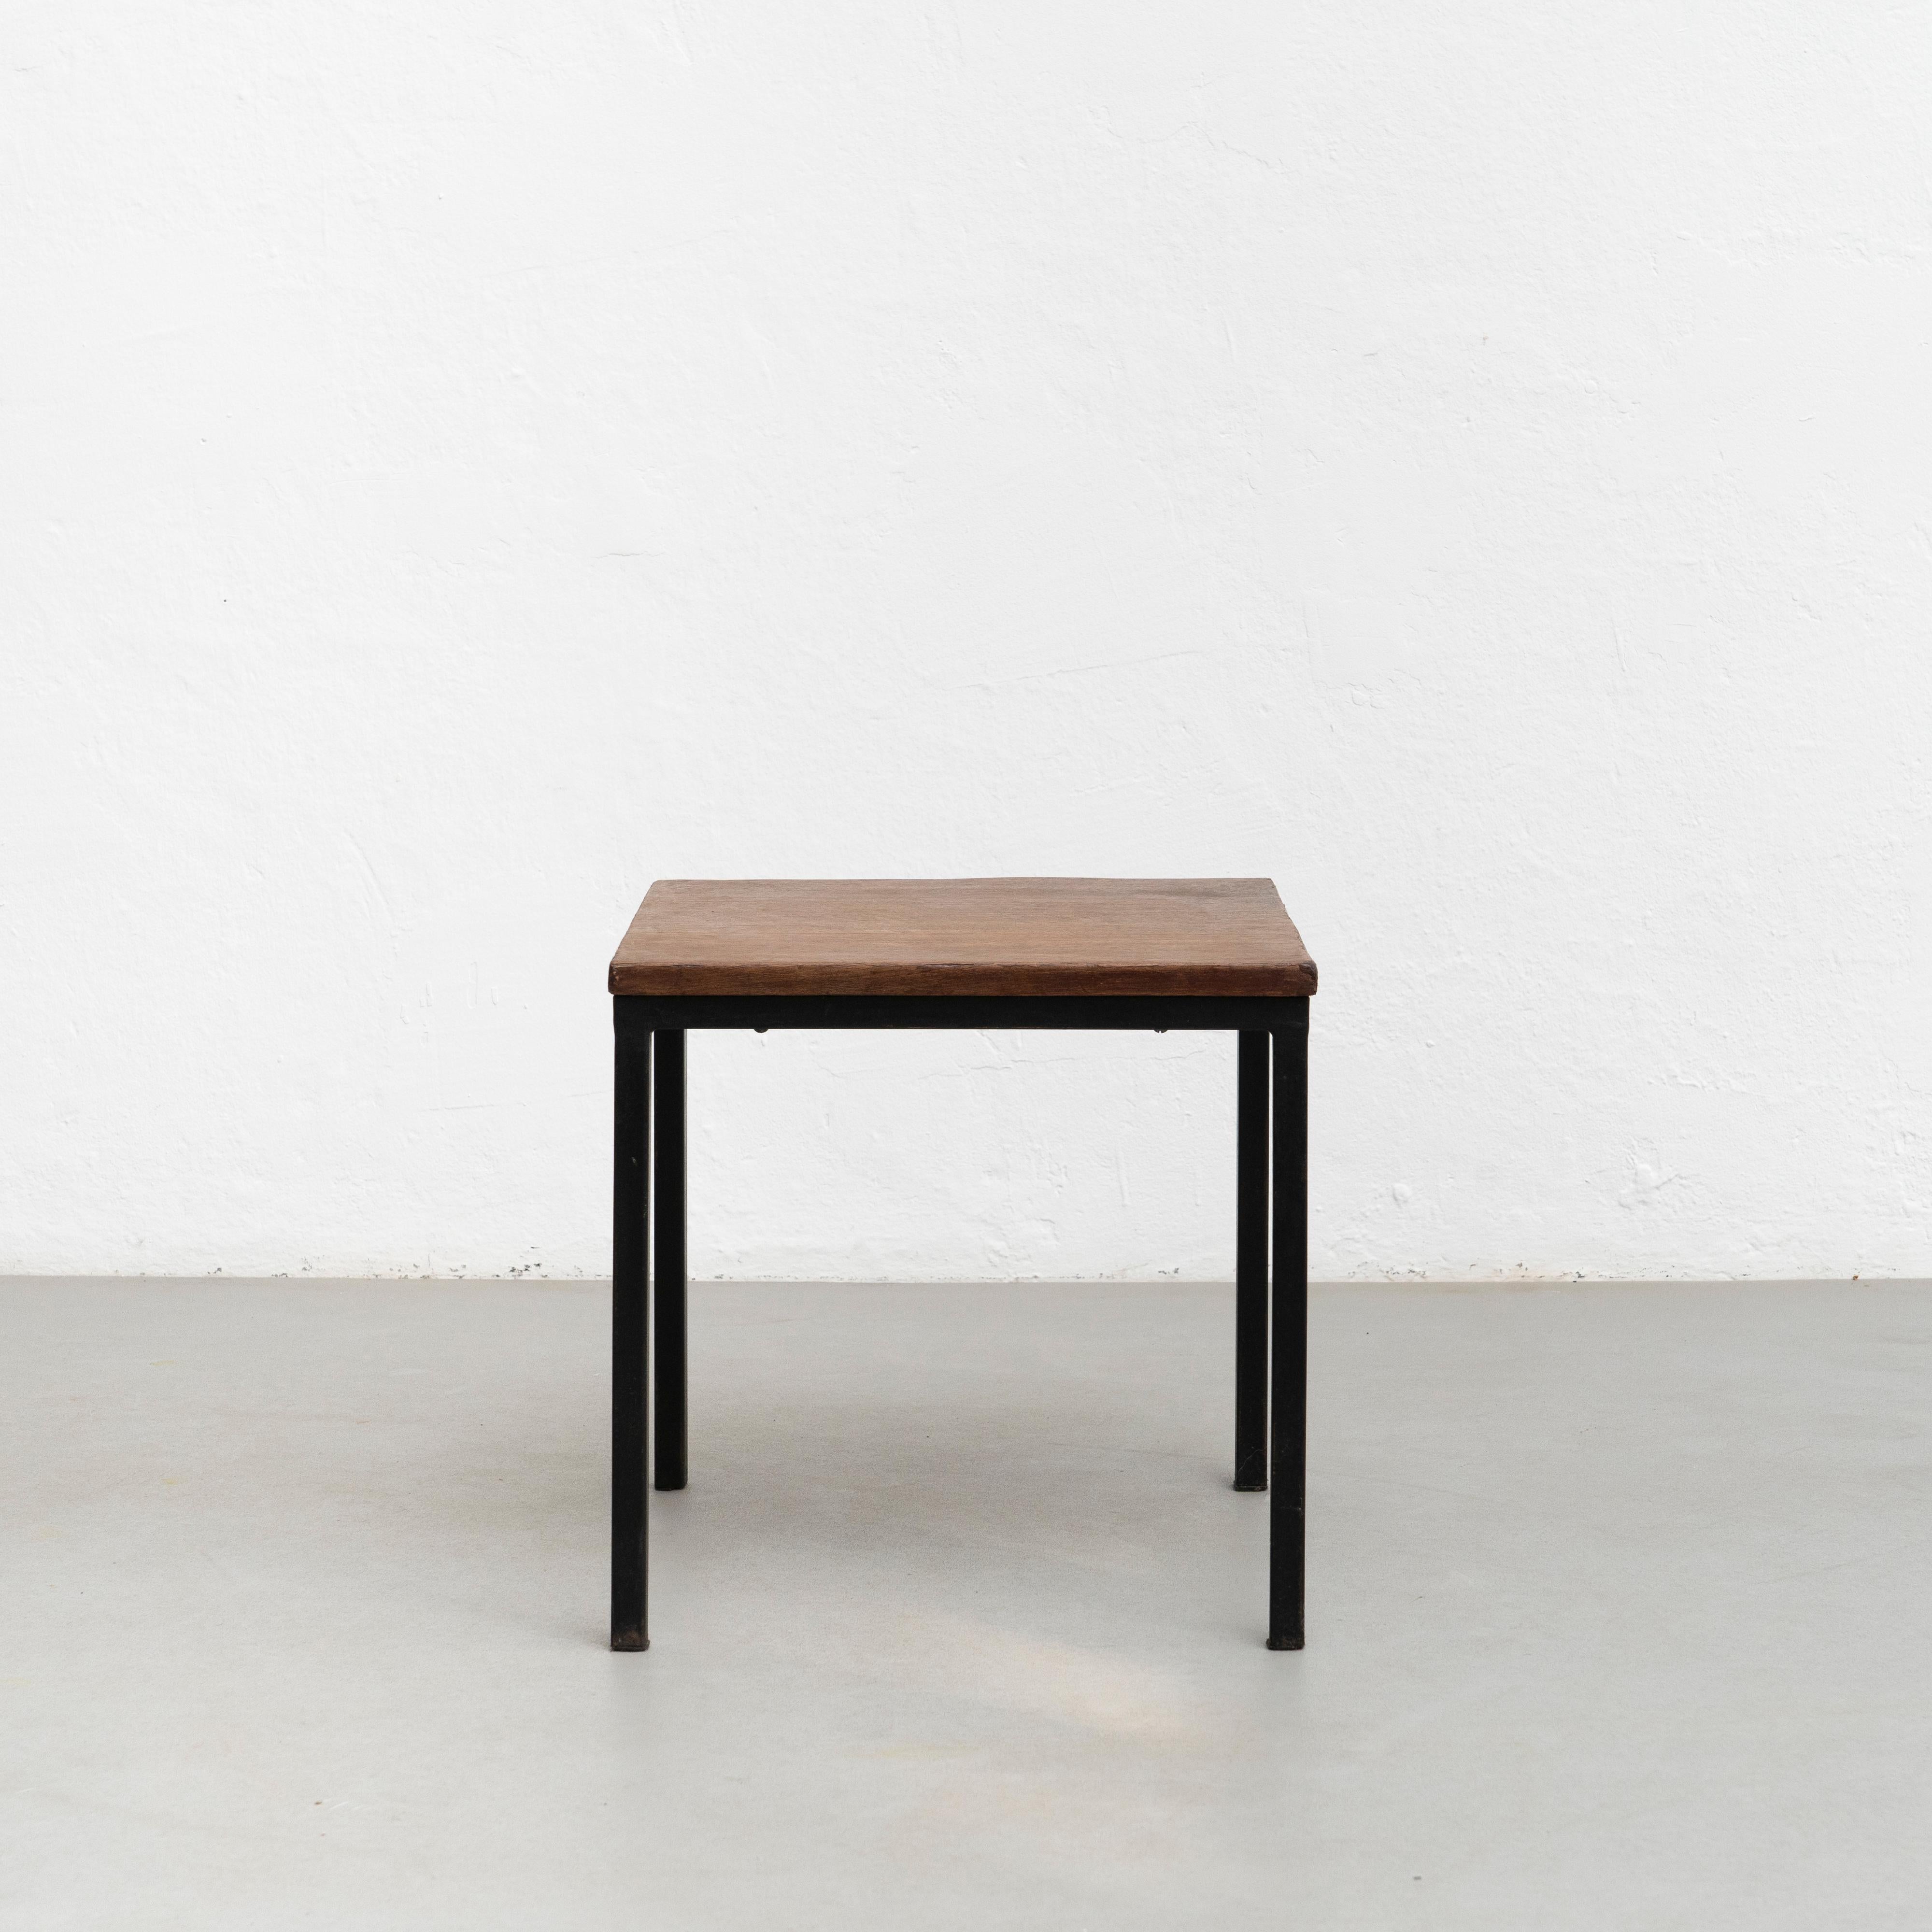 Low table designed by Charlotte Perriand, circa 1950 from Cité Cansado, Mauritania, Africa. 

Painted steel, wood.

Measures: 74.3 x 80 x 80 cm

In good original condition, with minor wear consistent with age and use, preserving a beautiful